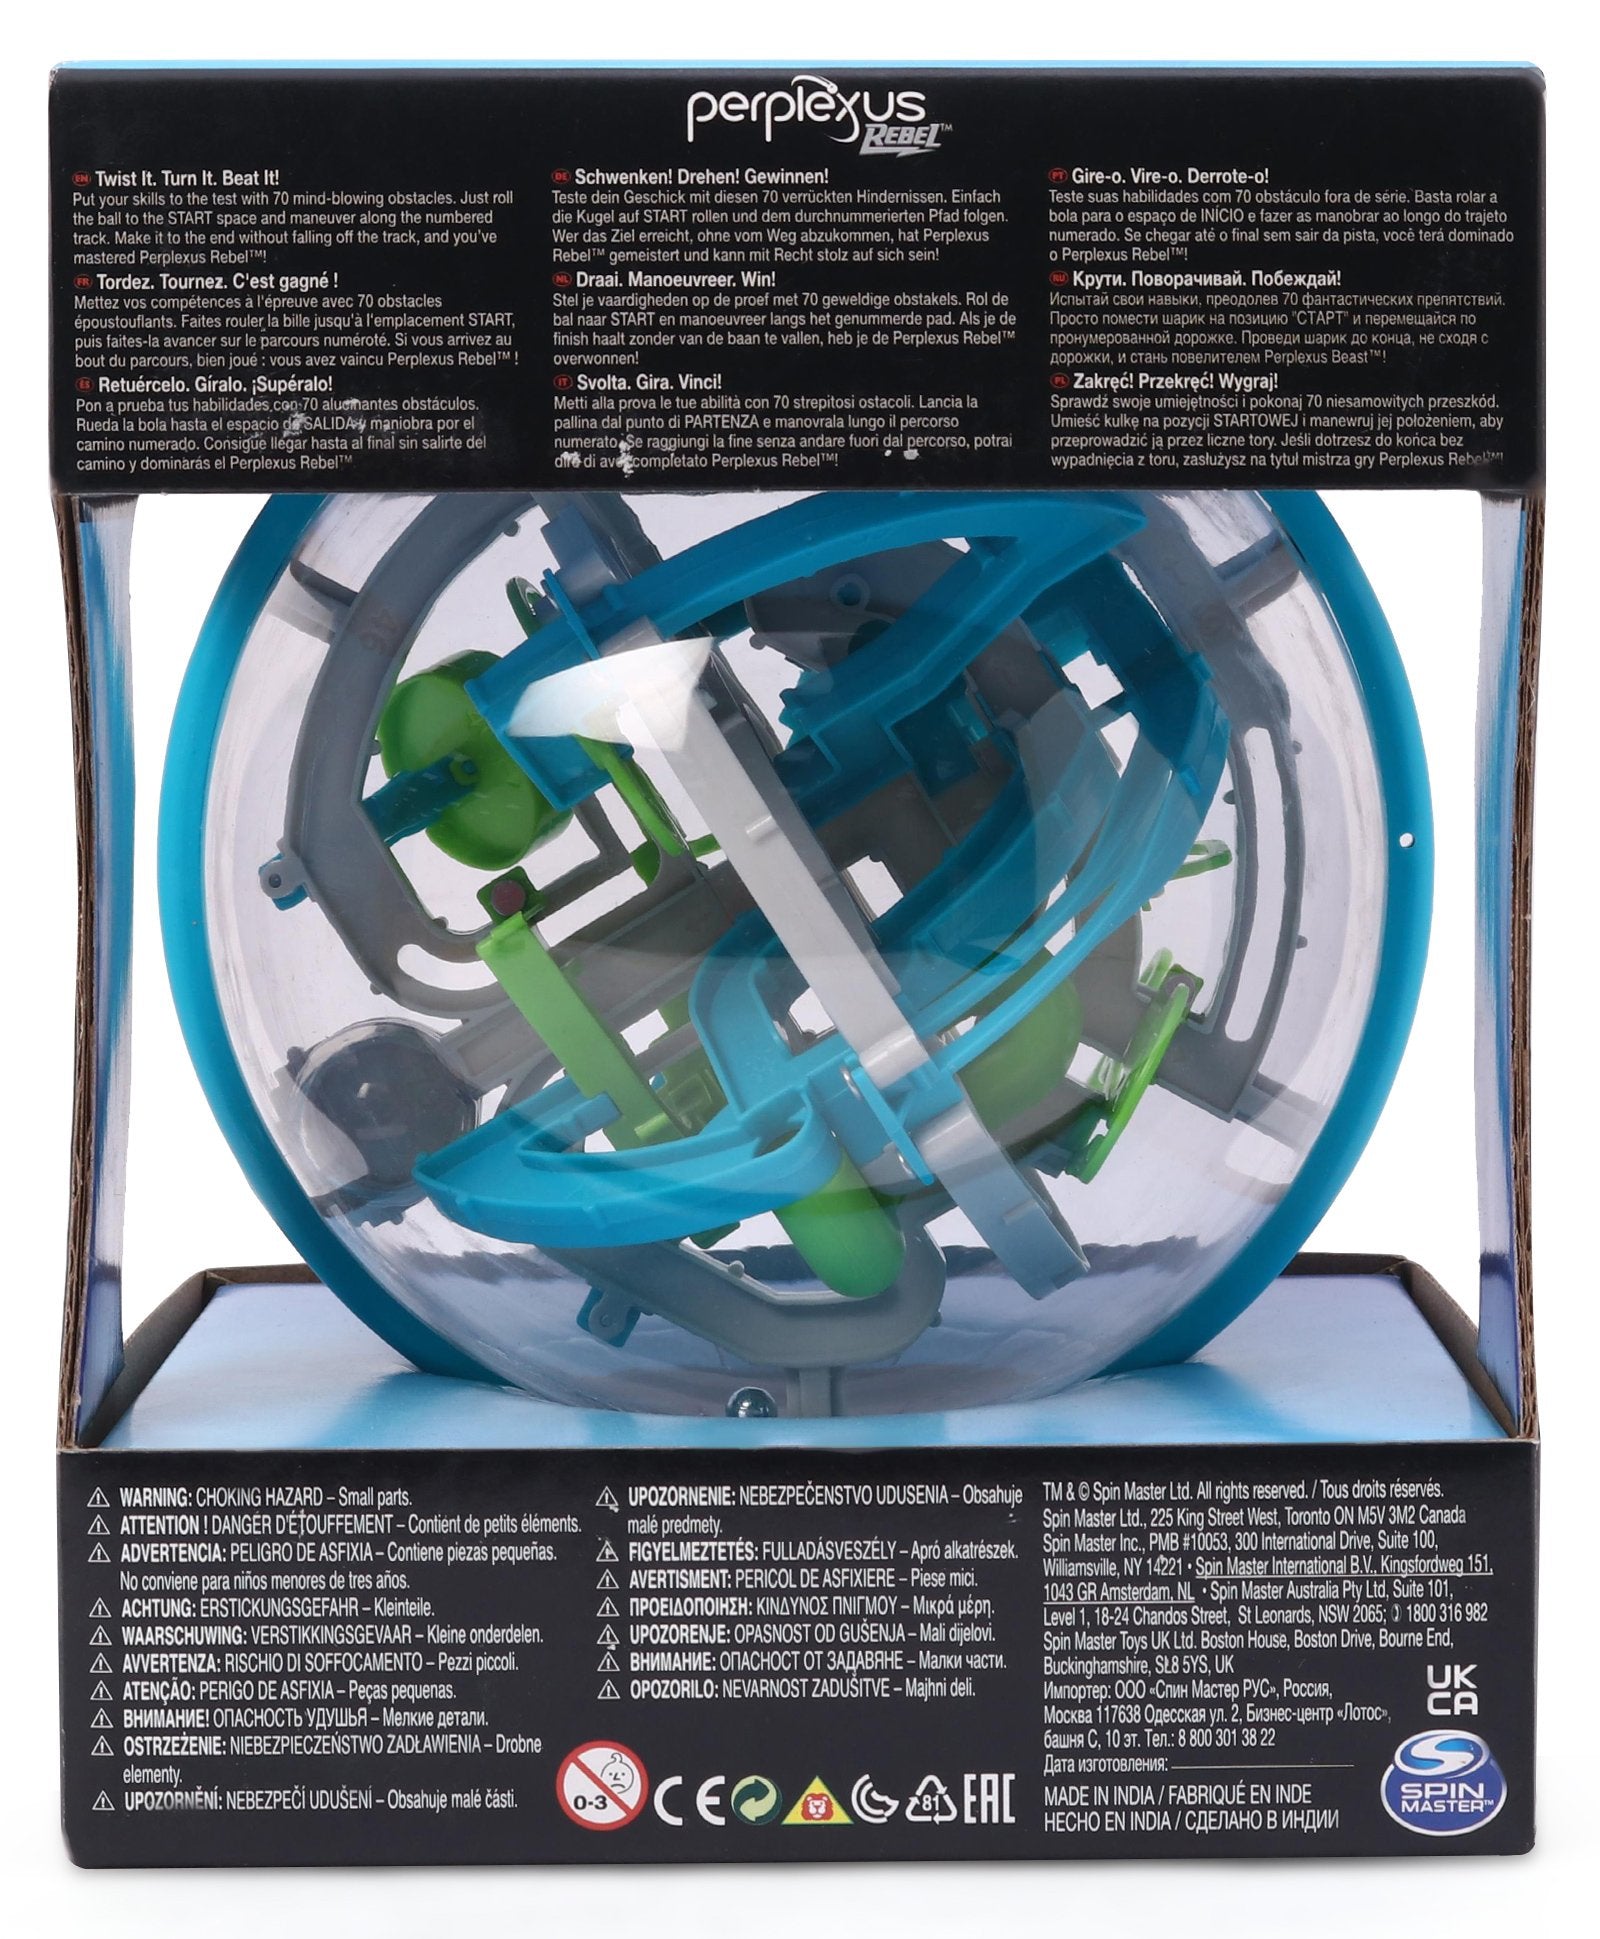 Spin Master Perplexus Rebel 3D Maze Game with 70 Obstacles - Multicolo –